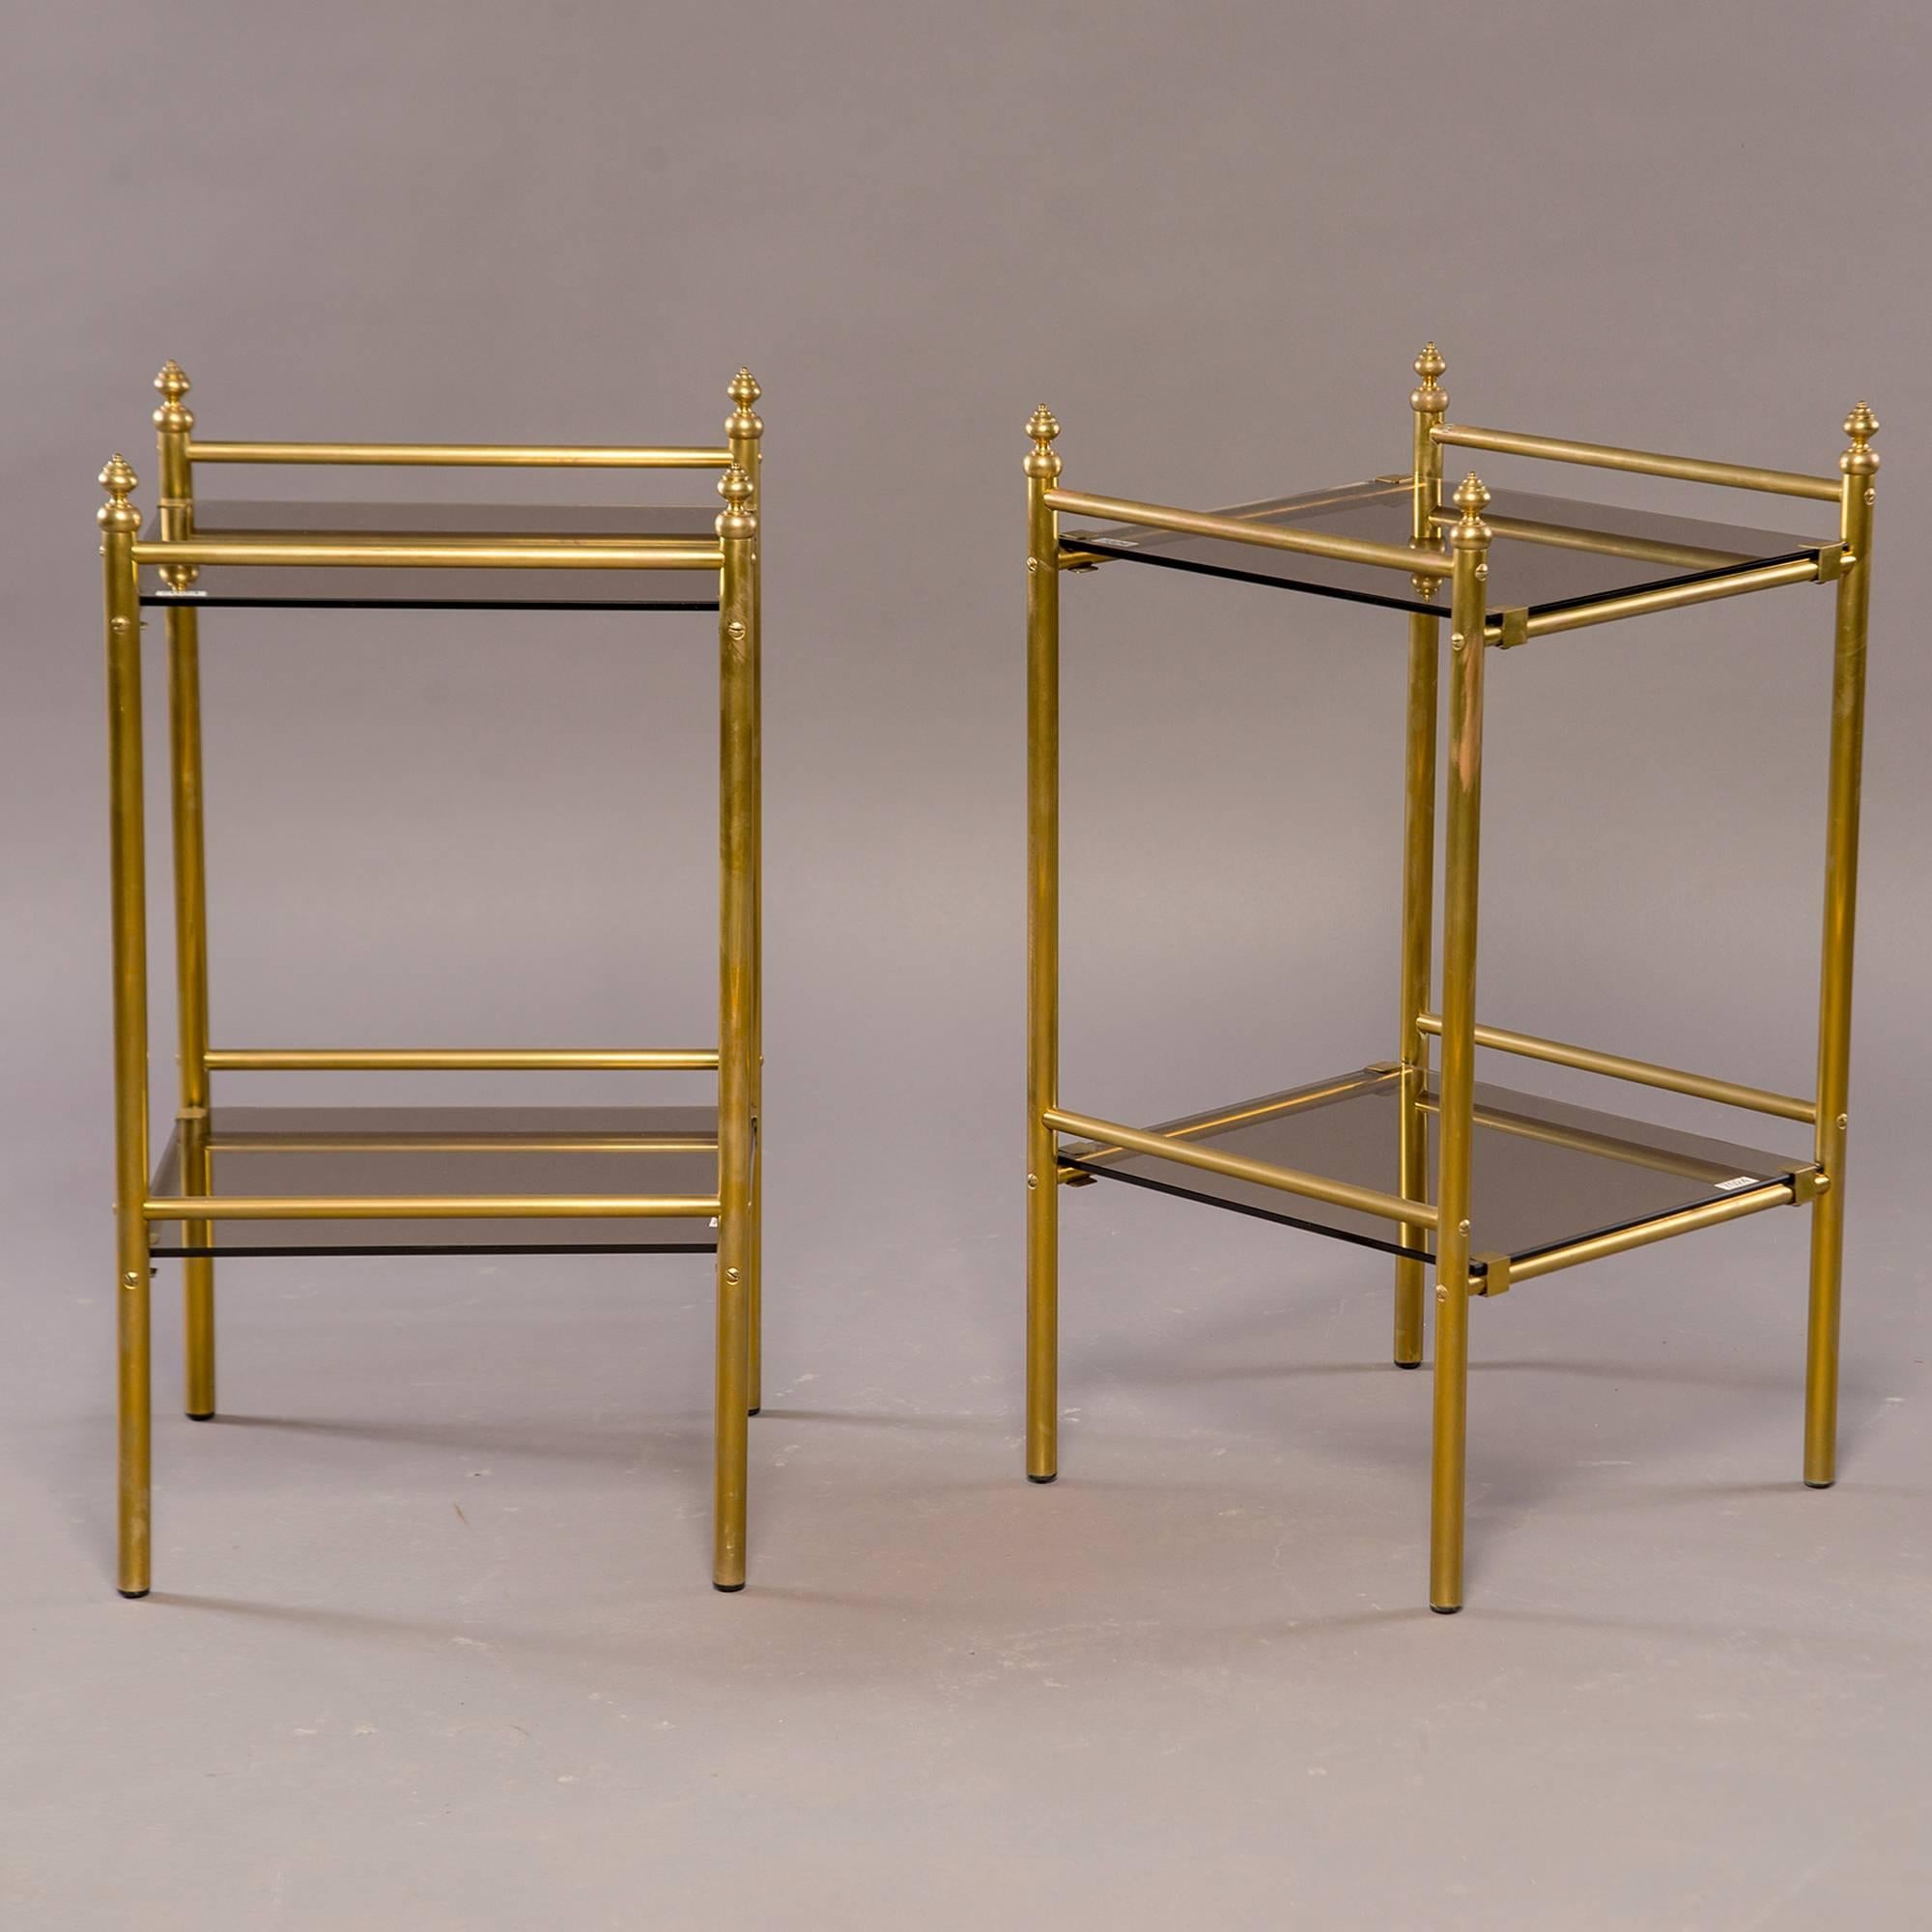 Pair of brass two-tier side tables have smoked glass shelves and tops and decorative finials, circa 1960s. Unknown maker. Found in France. Sold and priced as a pair.